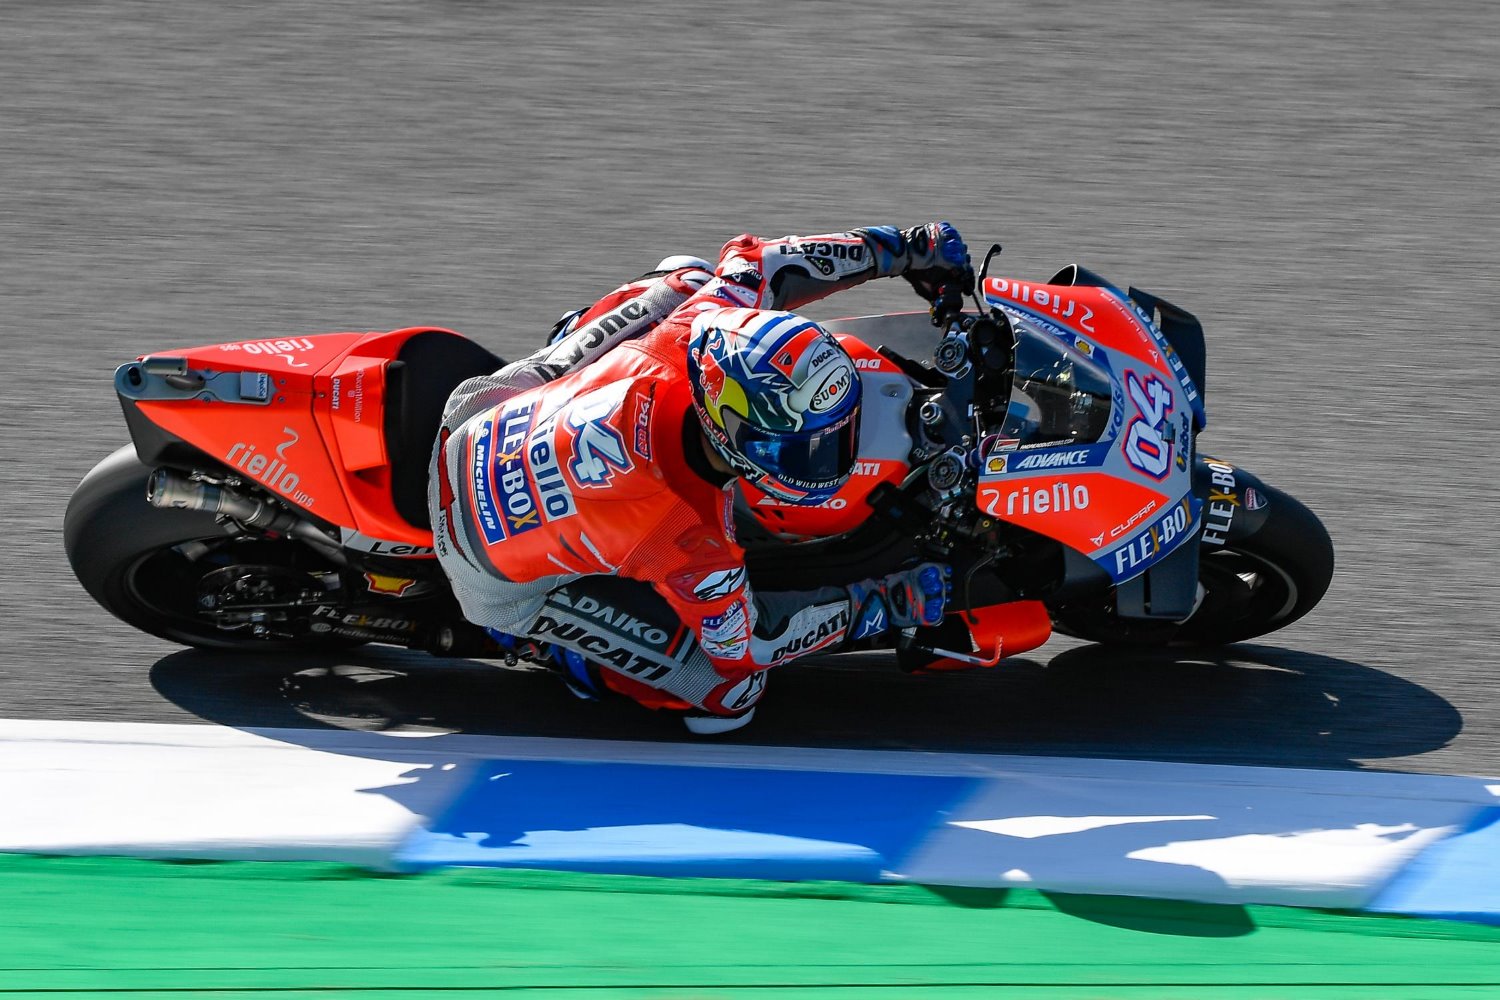 In the end Dovizioso was not match for the superior skills of Marquez